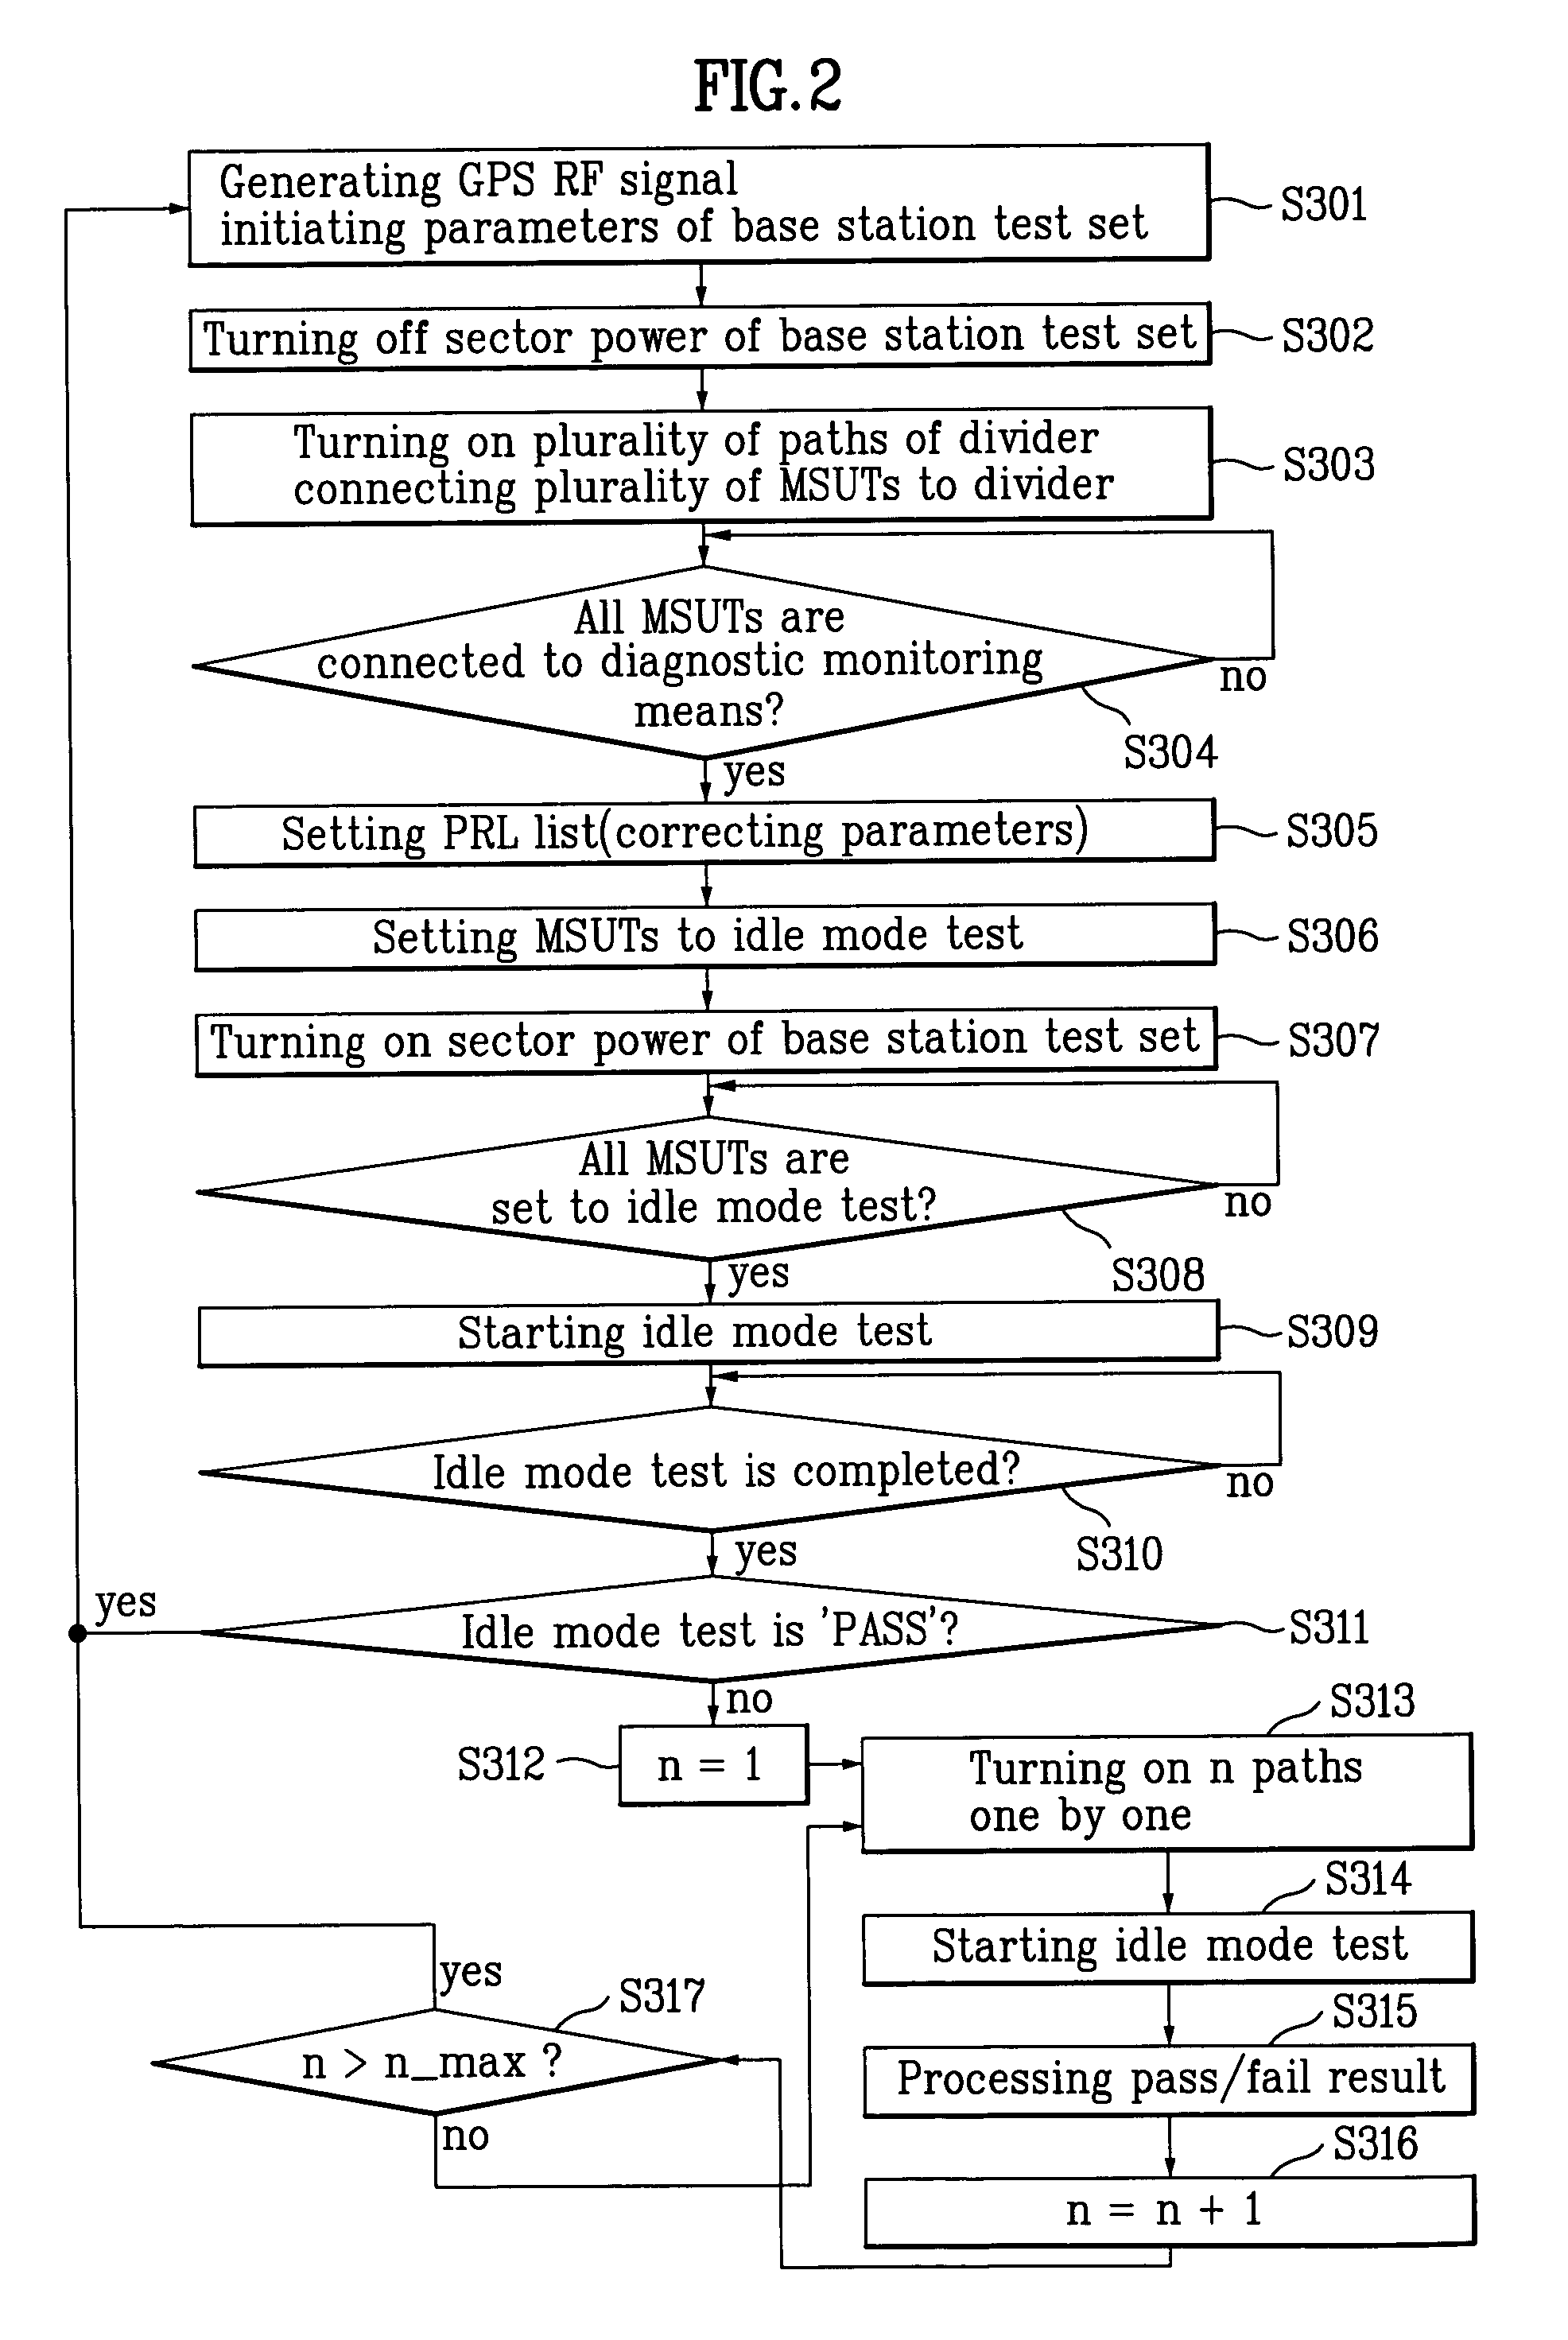 Apparatus and method for testing performance of mobile station having GPS function